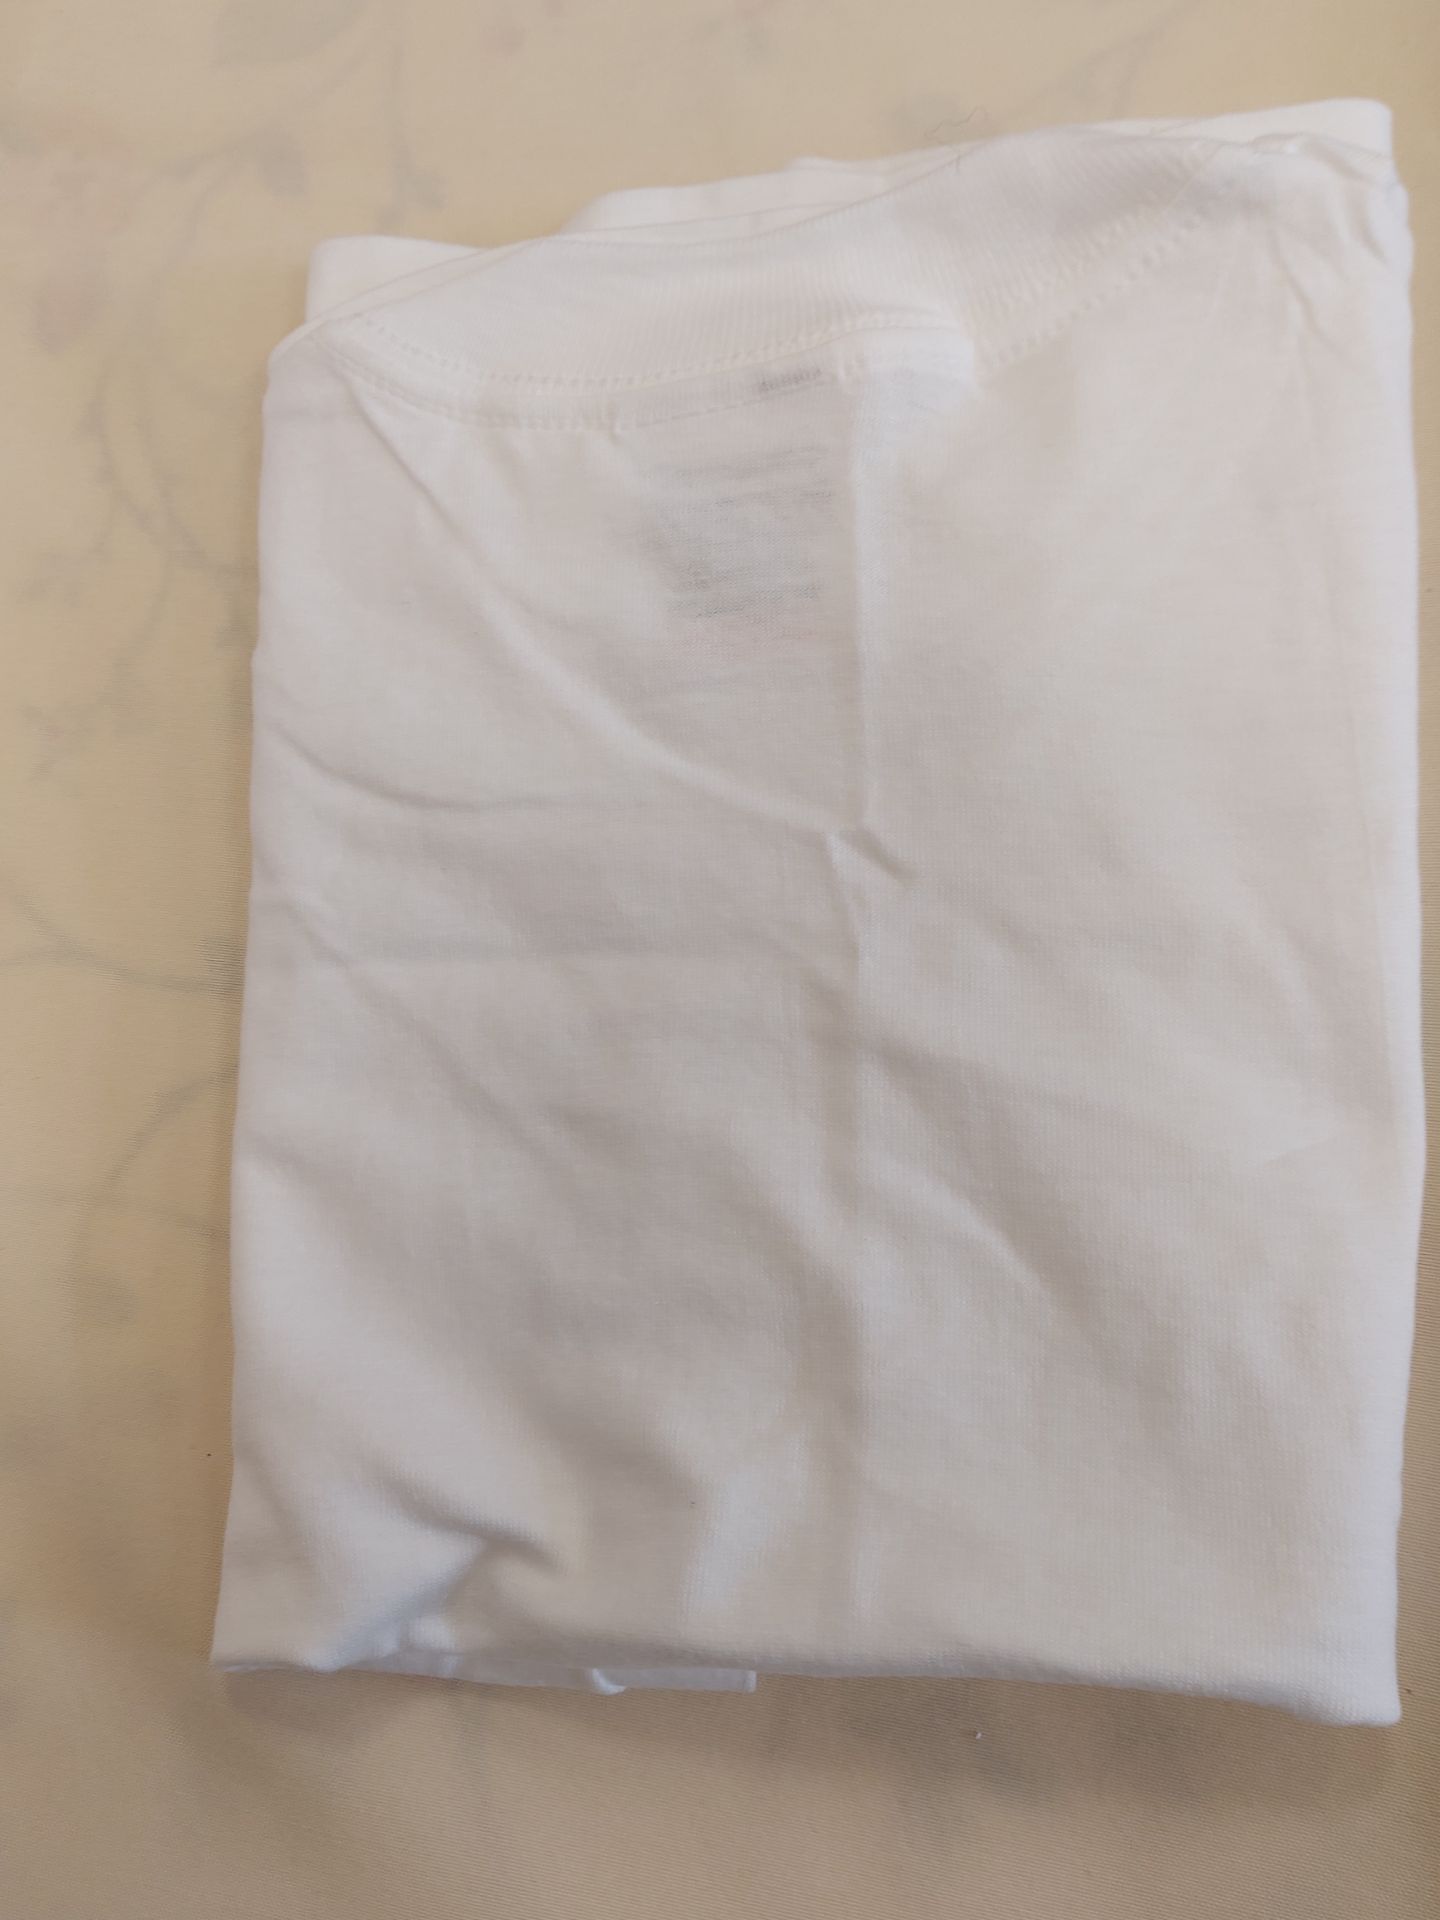 Pack of 6 White Tee-Shirts - Image 3 of 6